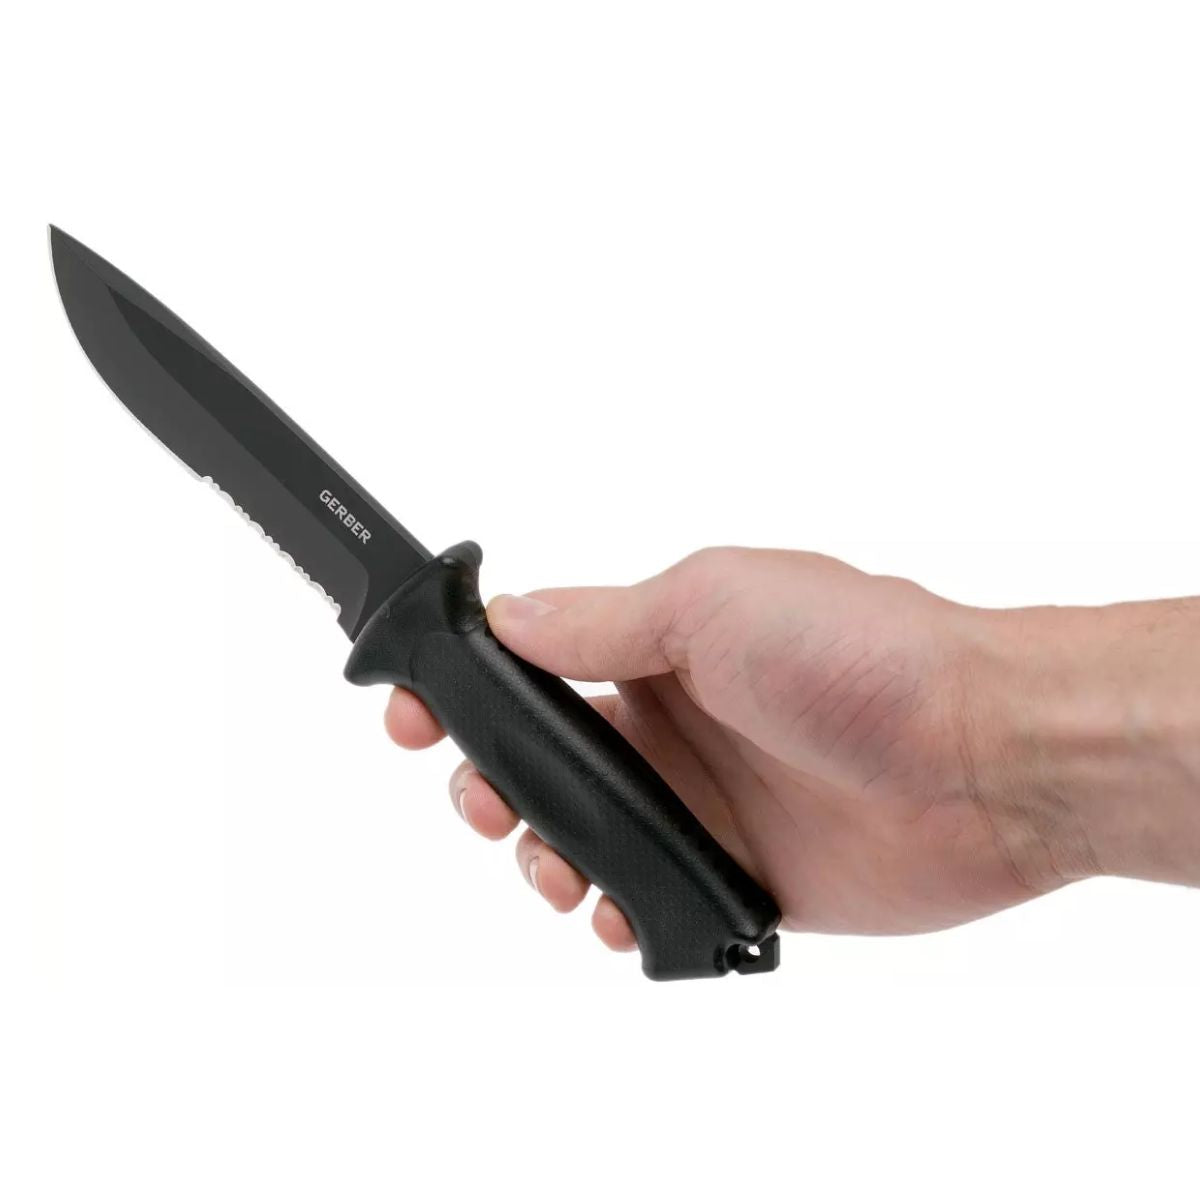 Gerber Prodigy Serrated Fixed Blade Survival Knife - Black 1